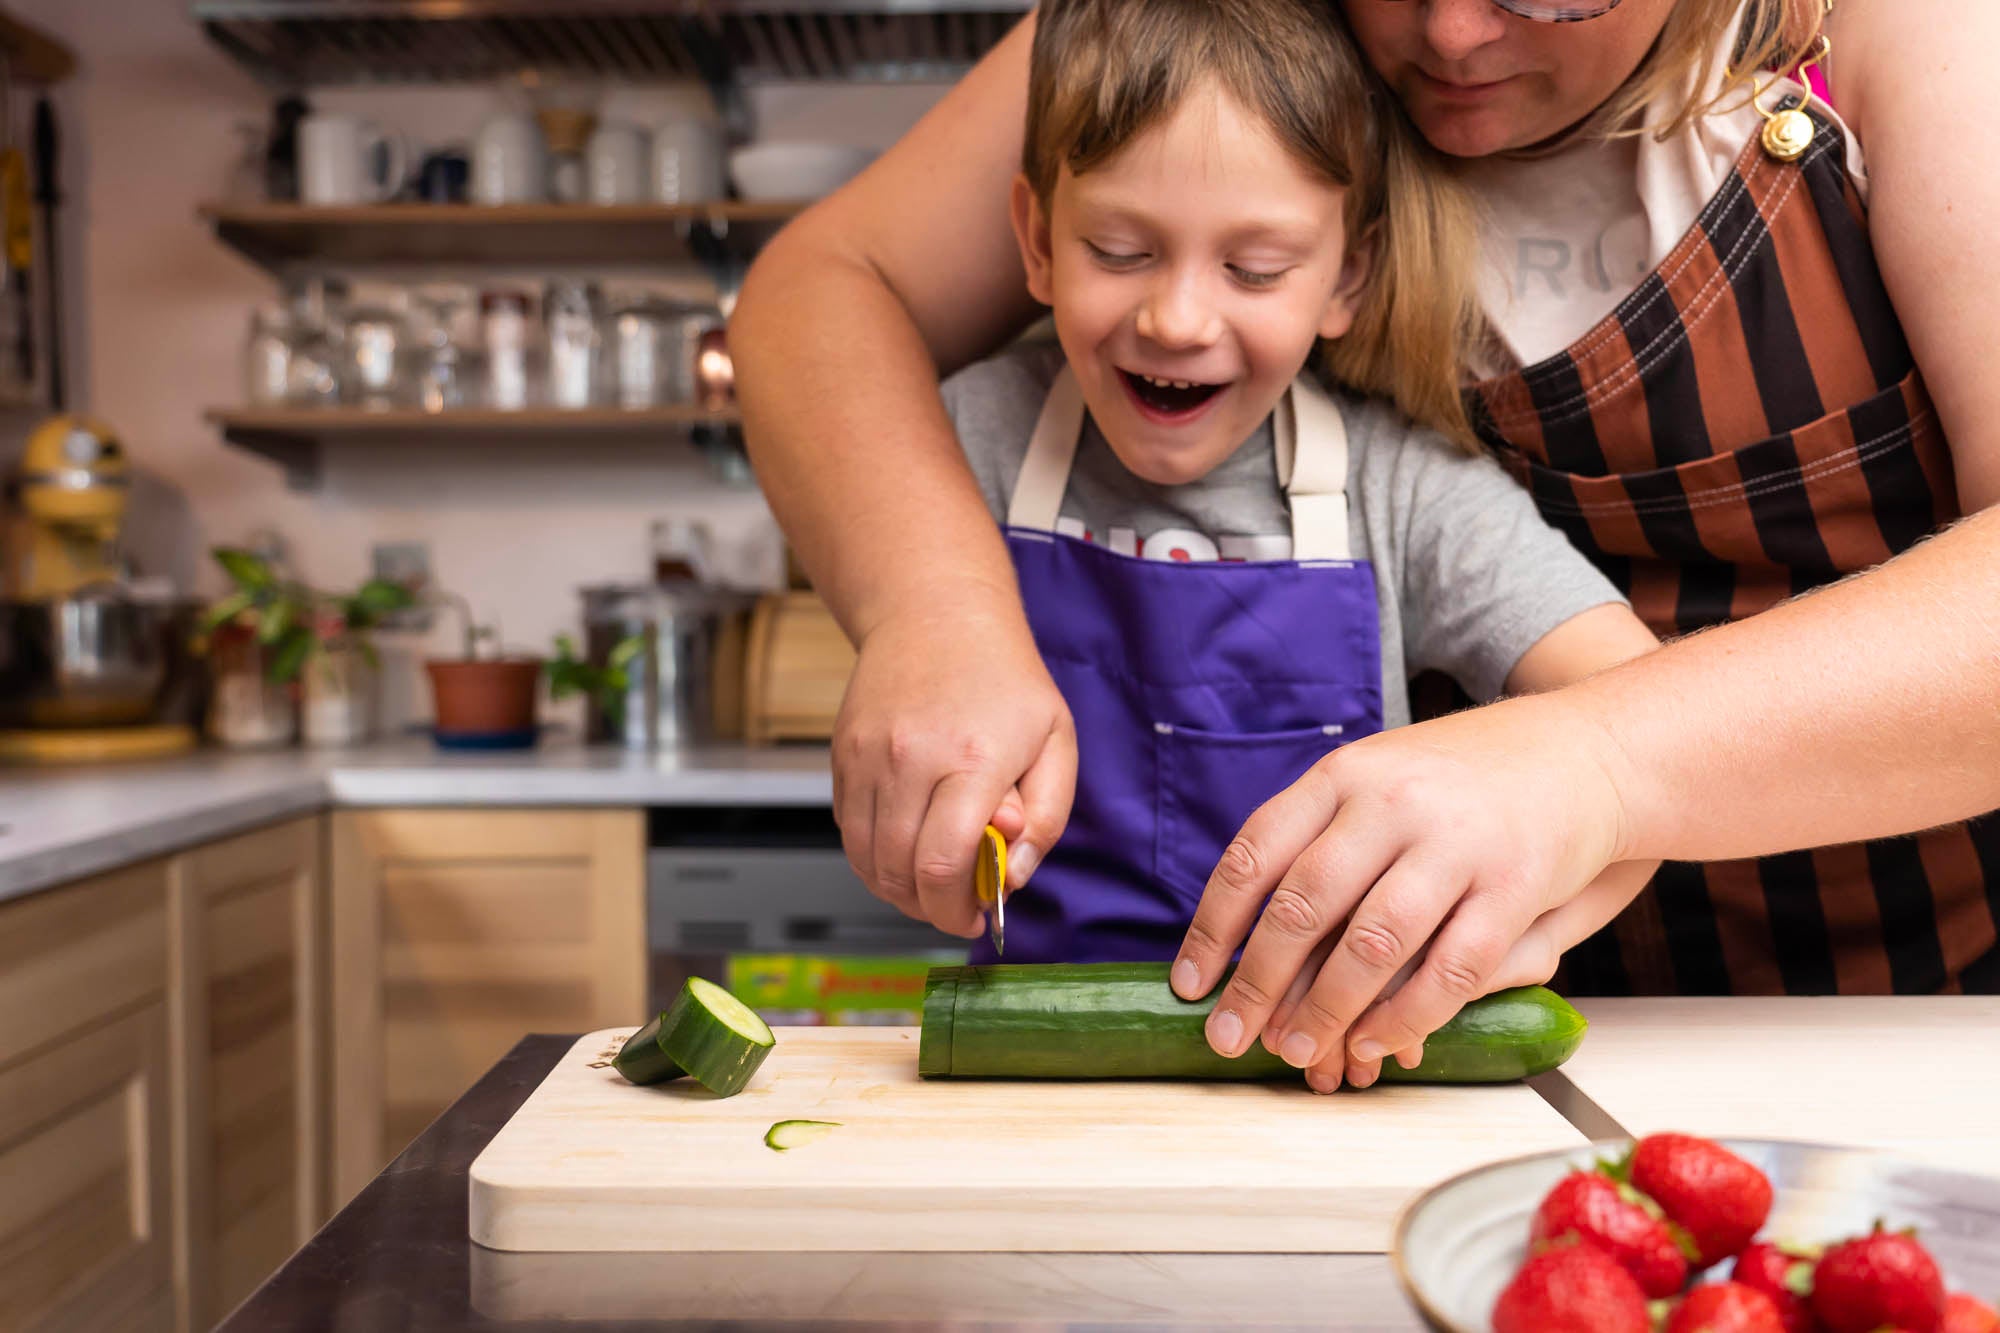 An Ex-Chef’s Guide to Teaching Kids Knife Skills